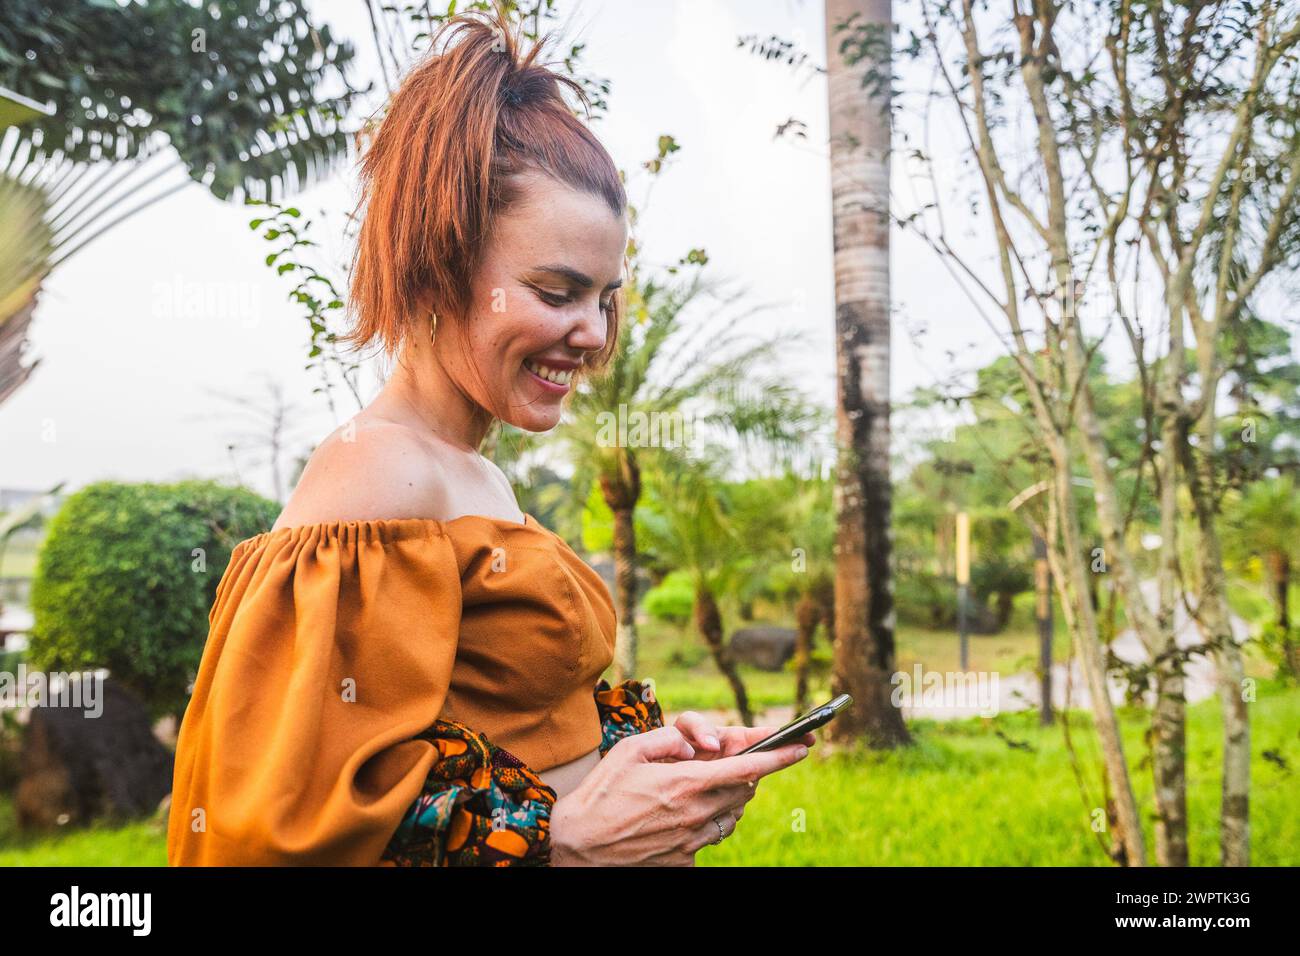 A smiling young woman uses her phone while outside Stock Photo